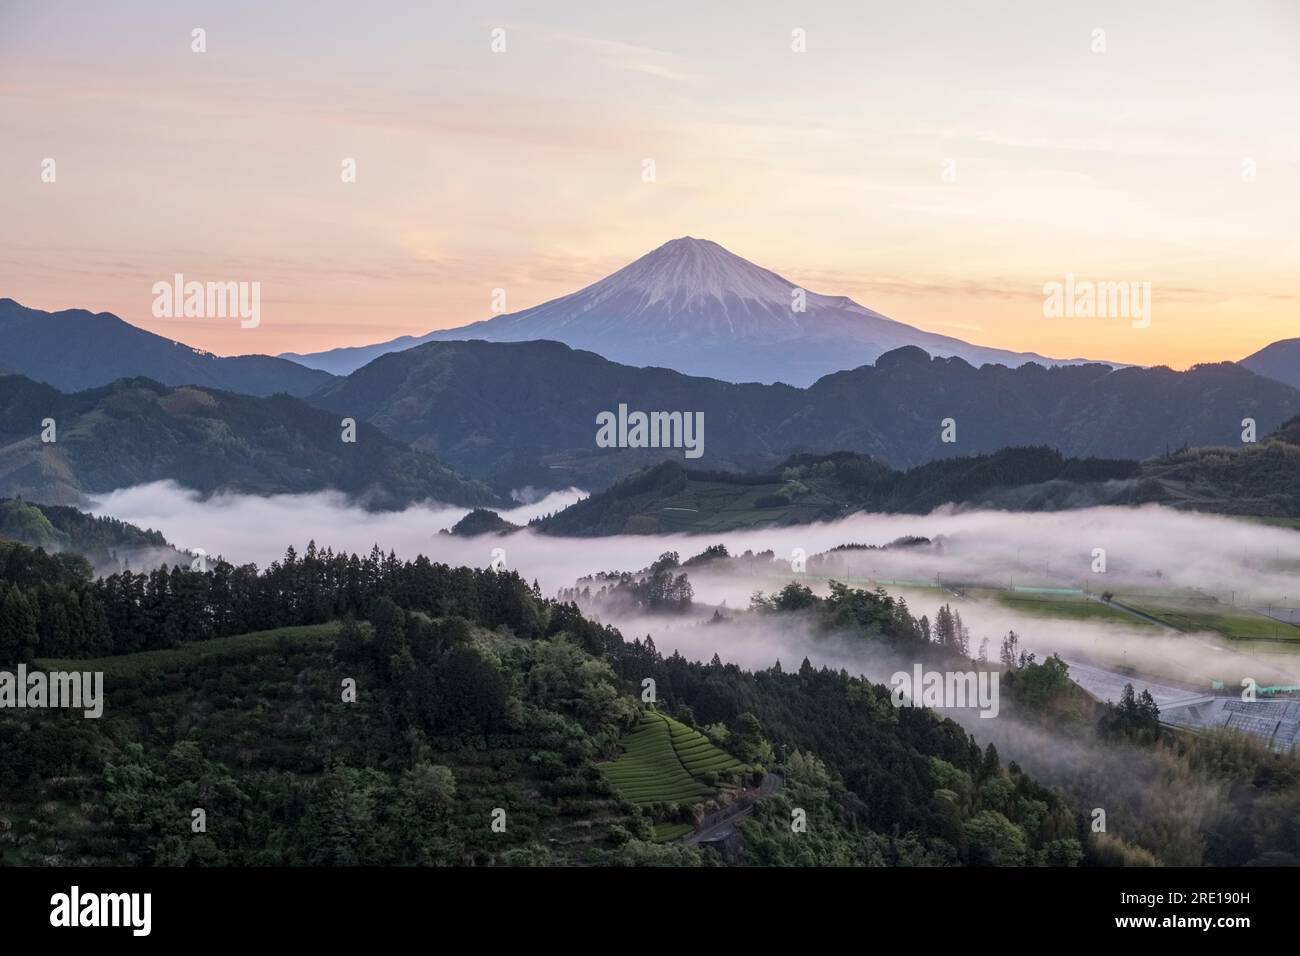 Japan, Yoshiwara: landscape with hills, Mount Fuji and mist in the valley, Honshu Island Stock Photo